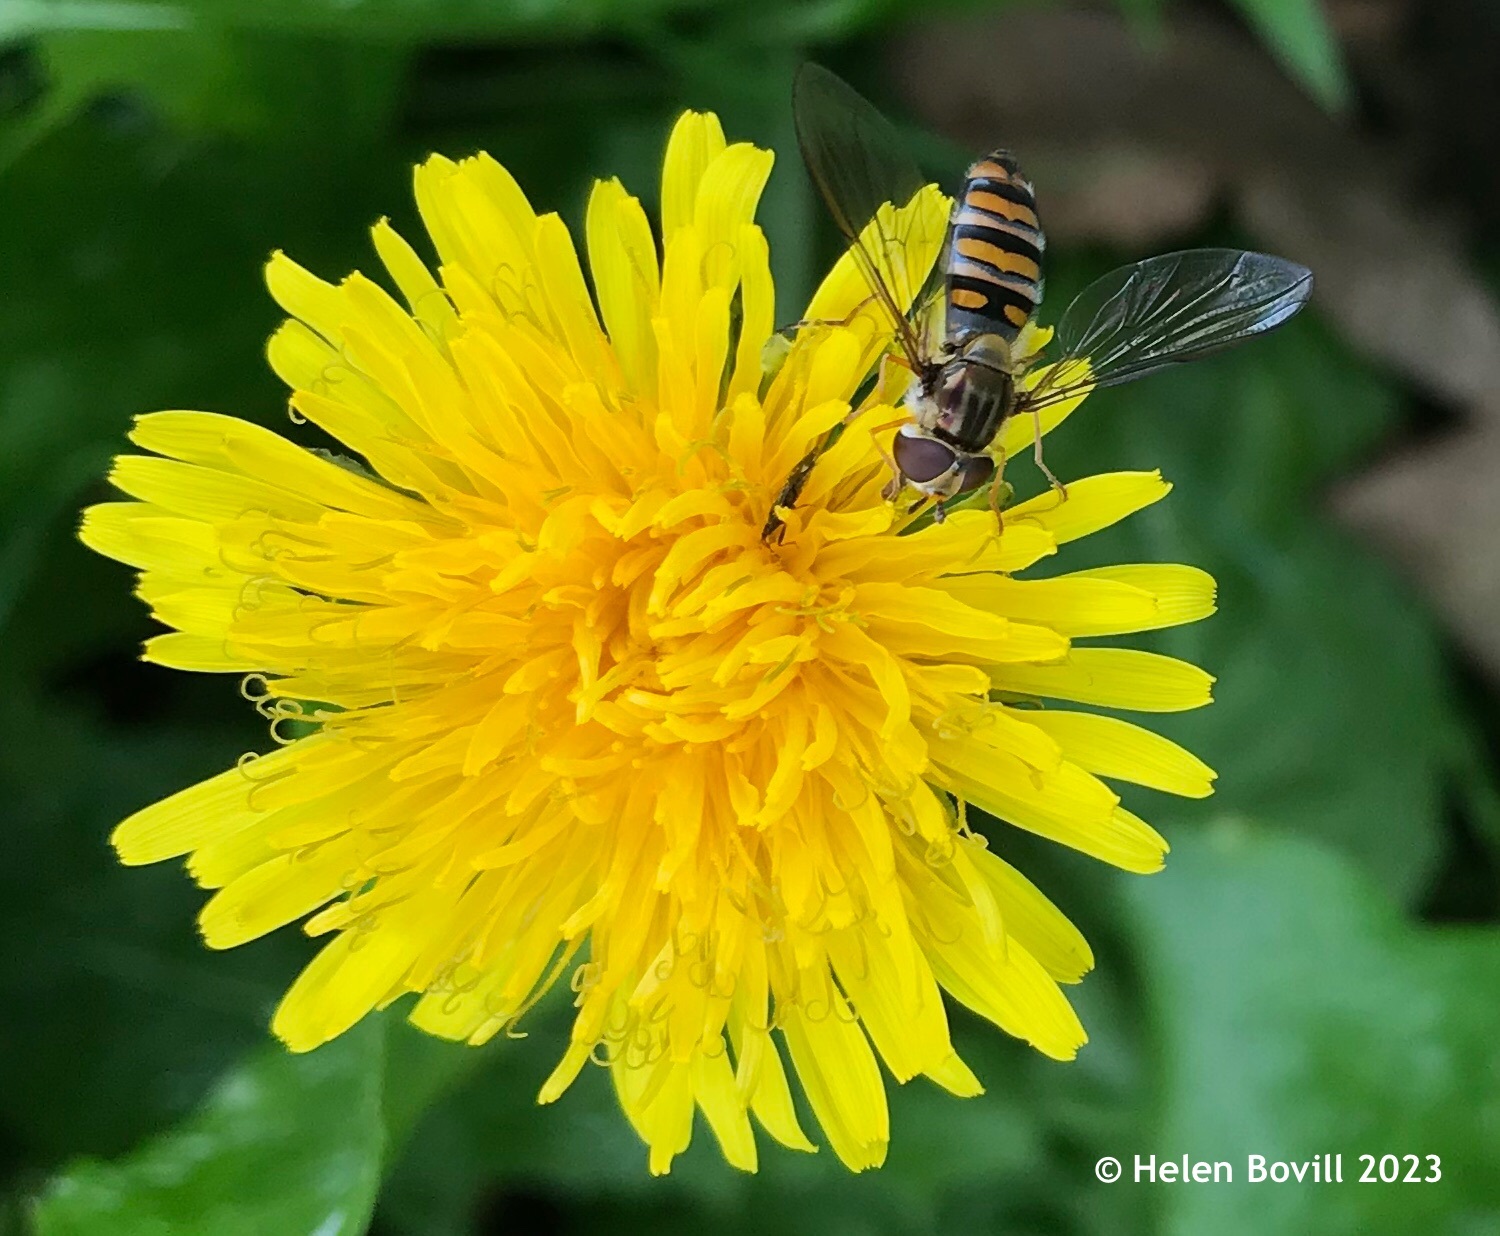 A Marmalade Hoverfly on a Dandelion